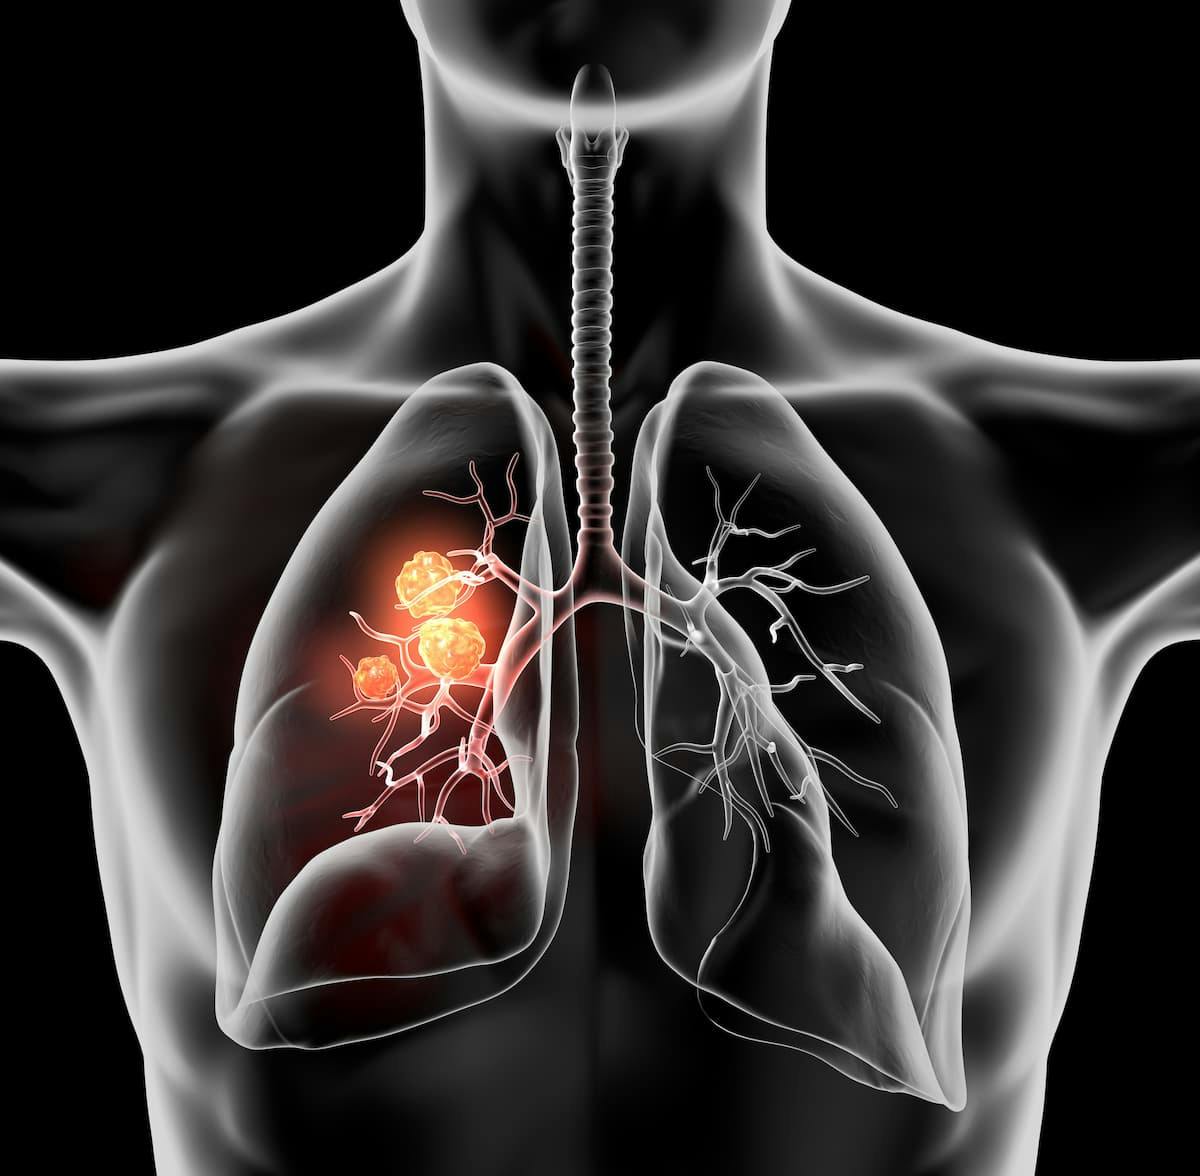 Factors including age, gender, and facility type may influence the likelihood of pain referrals for lung cancer, suggesting a need for multidisciplinary pain management in this patient population.